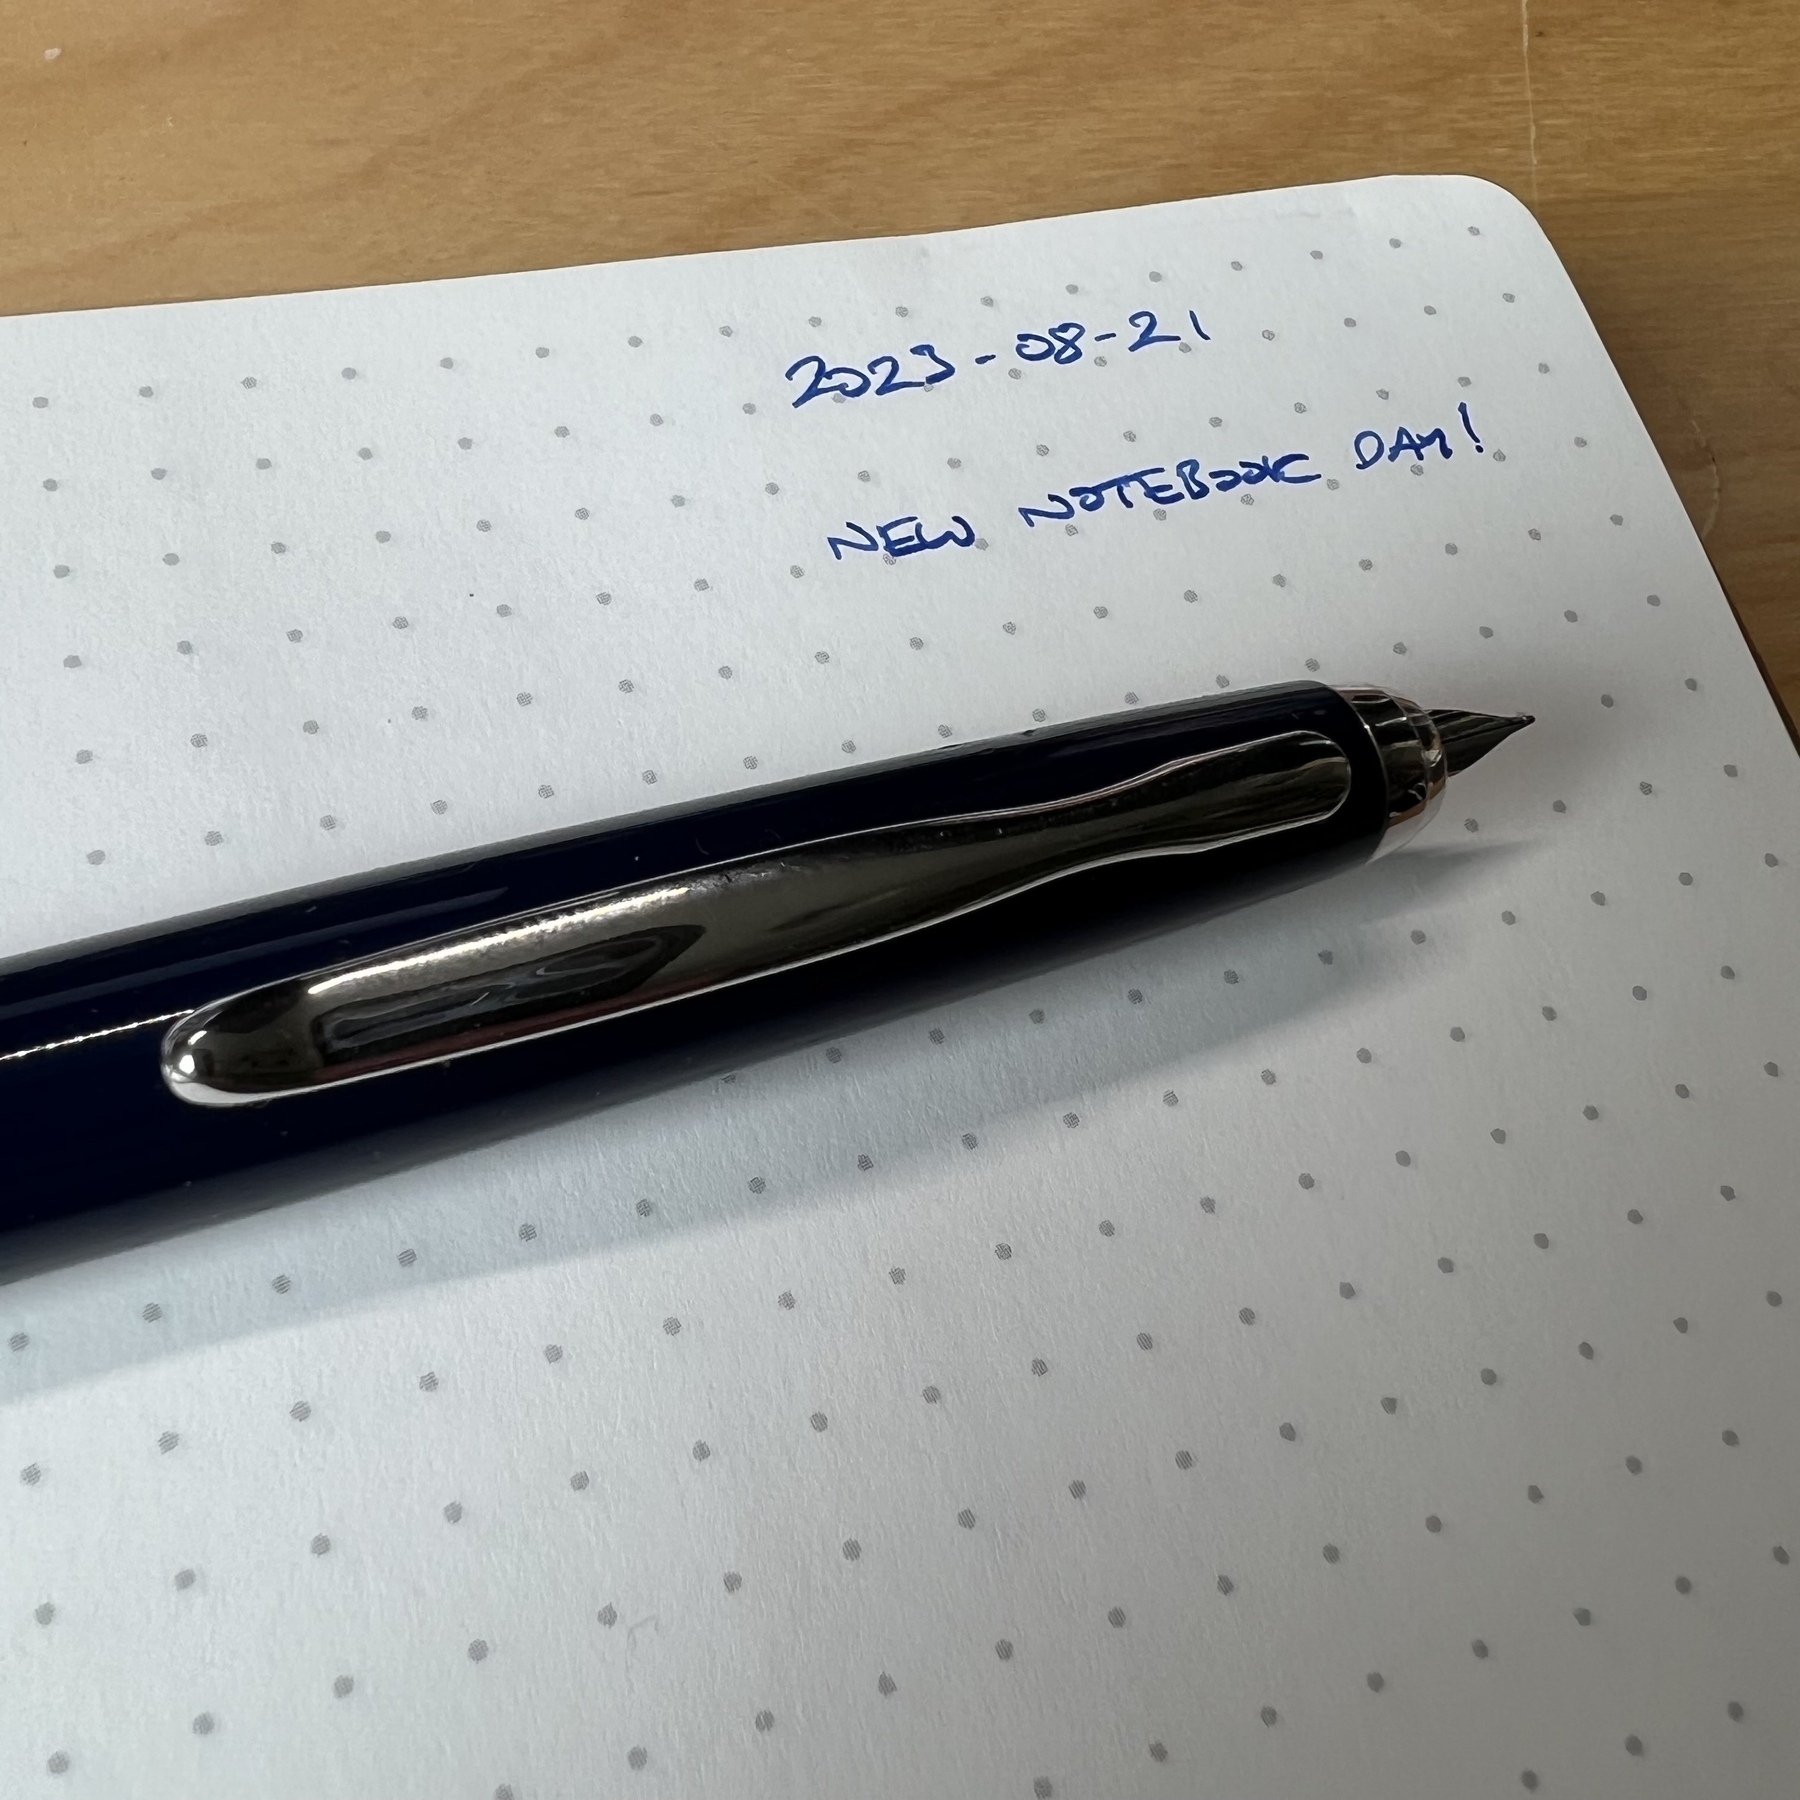 Photograph of a fountain pen sitting on a notebook page. Written on the page is today’s date and the words “New notebook day”.